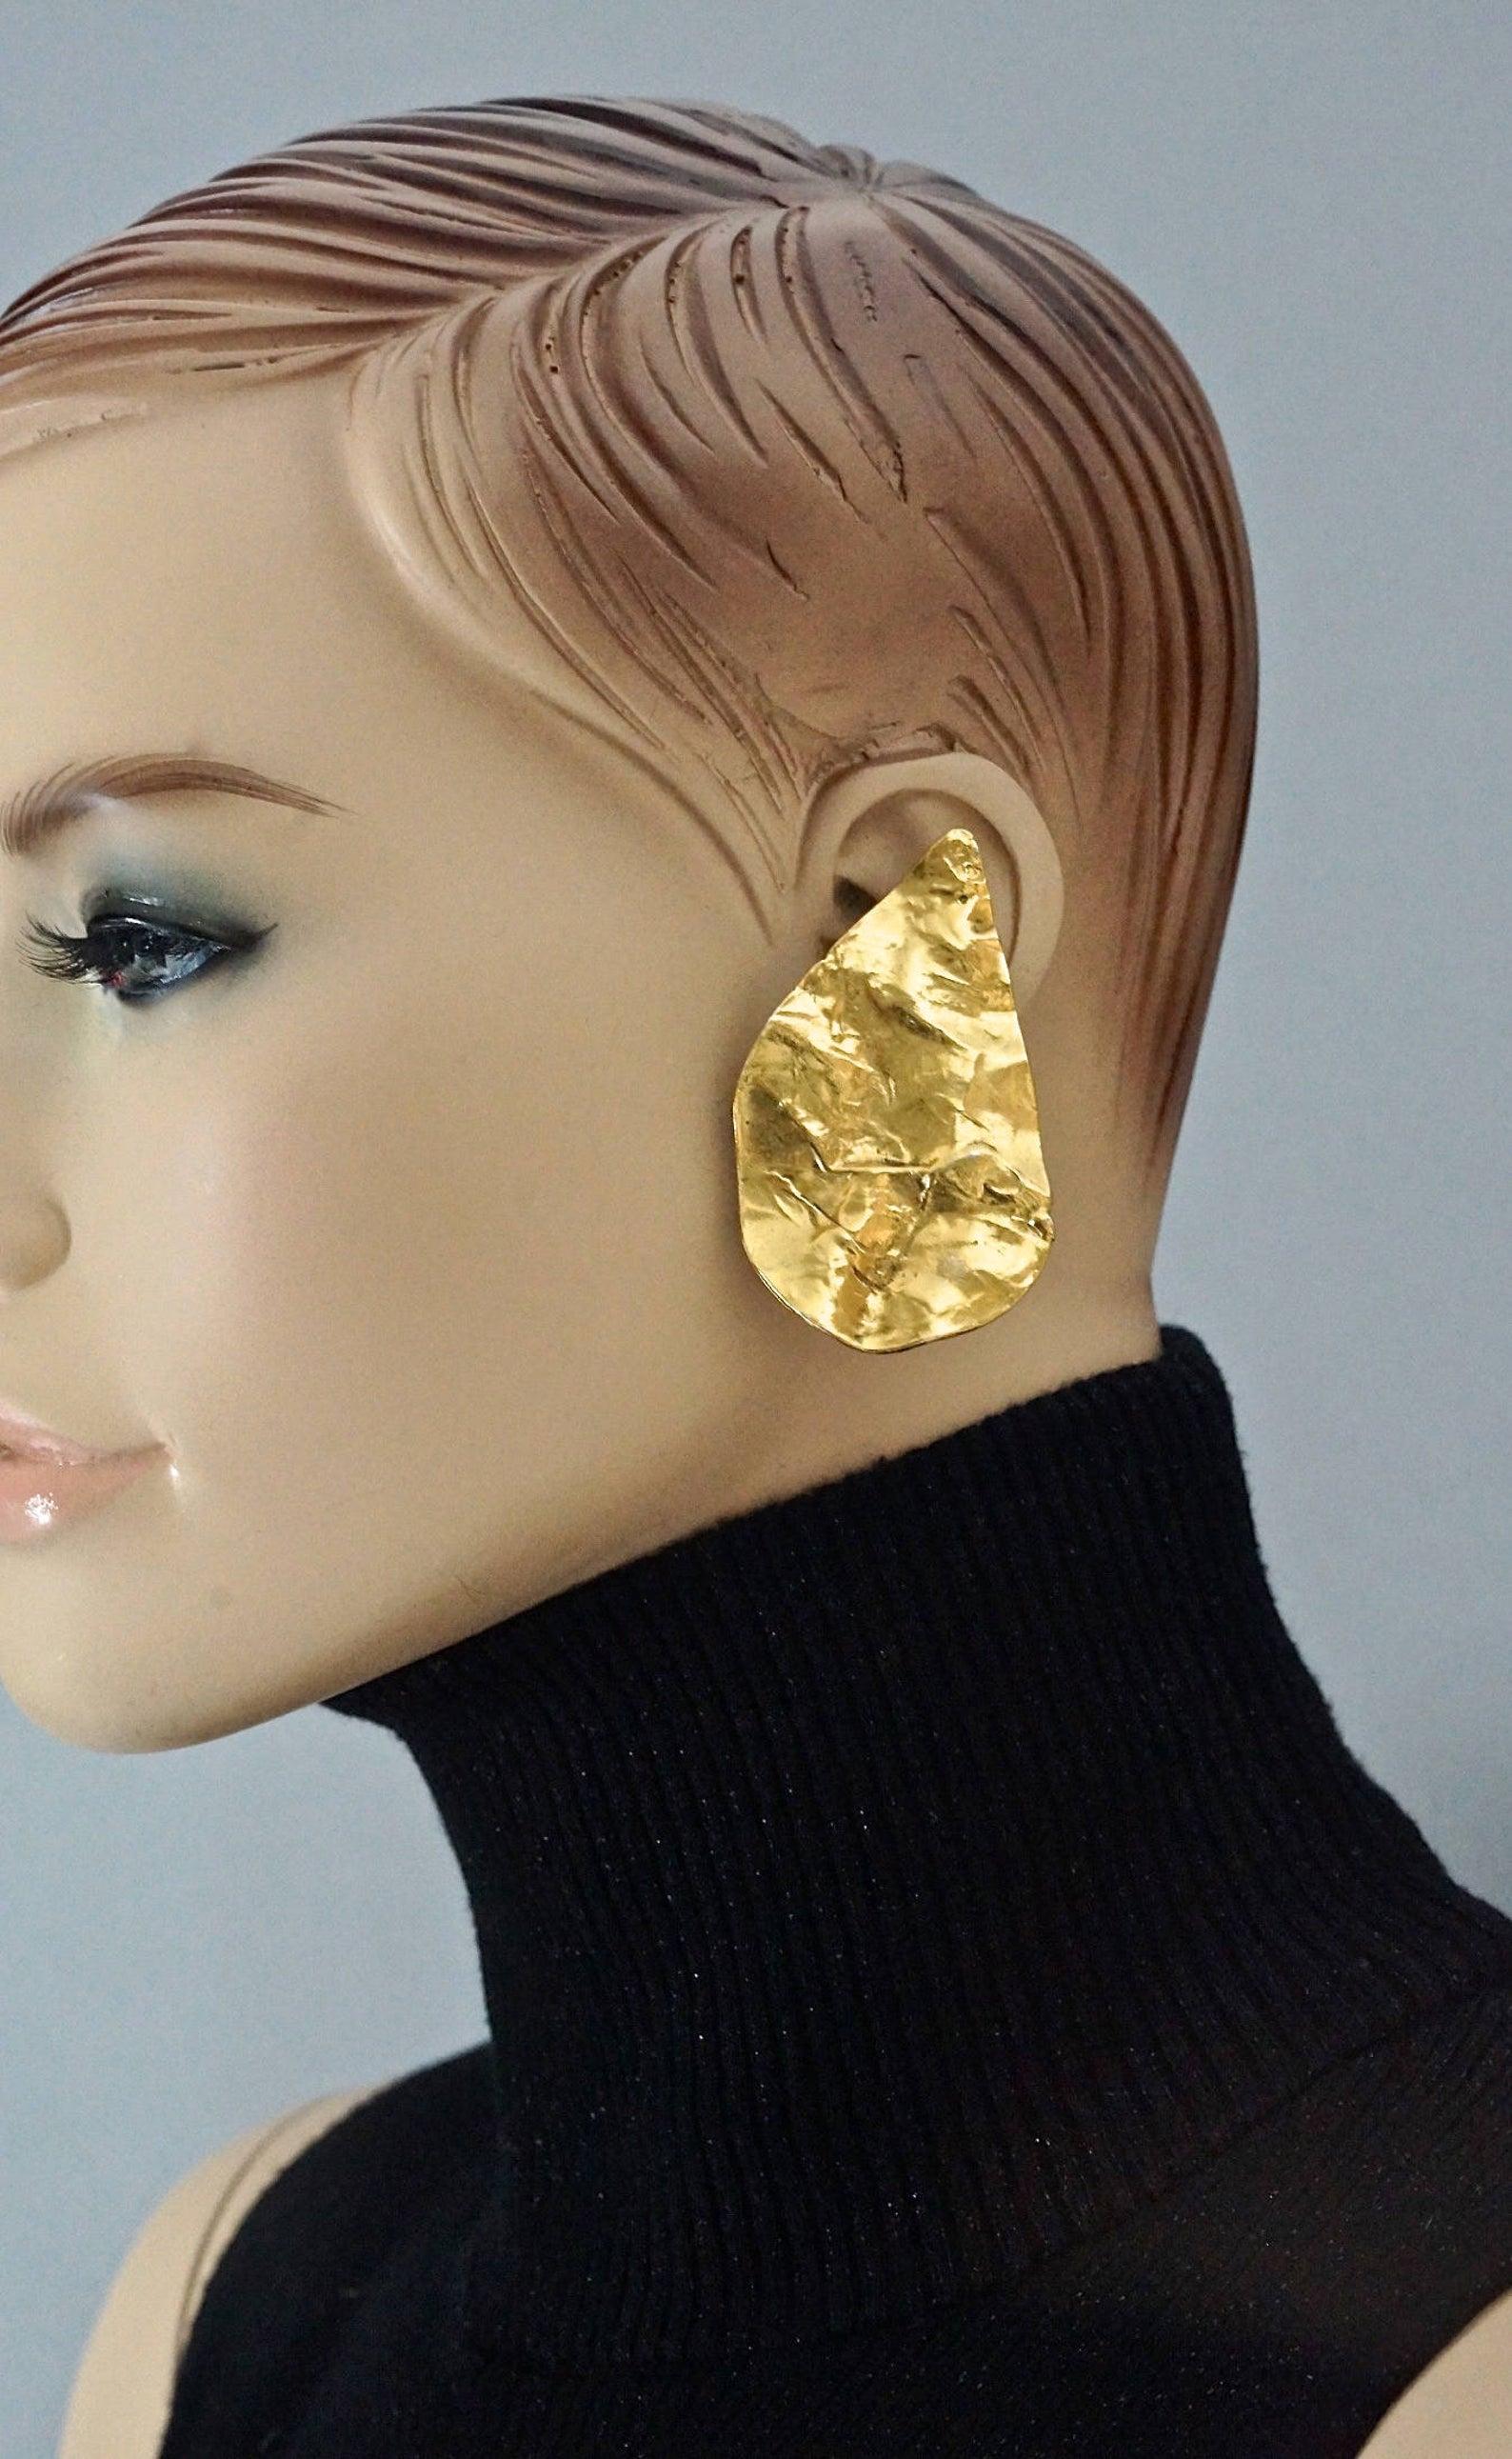 Vintage YVES SAINT LAURENT Ysl Massive Wrinkled Leaf Earrings

Measurements:
Height: 2.55 inches (6.5 cm)
Width: 1.49 inches (3.8 cm)
Weight per Earring: 16 gram

Features:
- 100% Authentic YVES SAINT LAURENT by Robert Goossens .
- Massive wrinkled